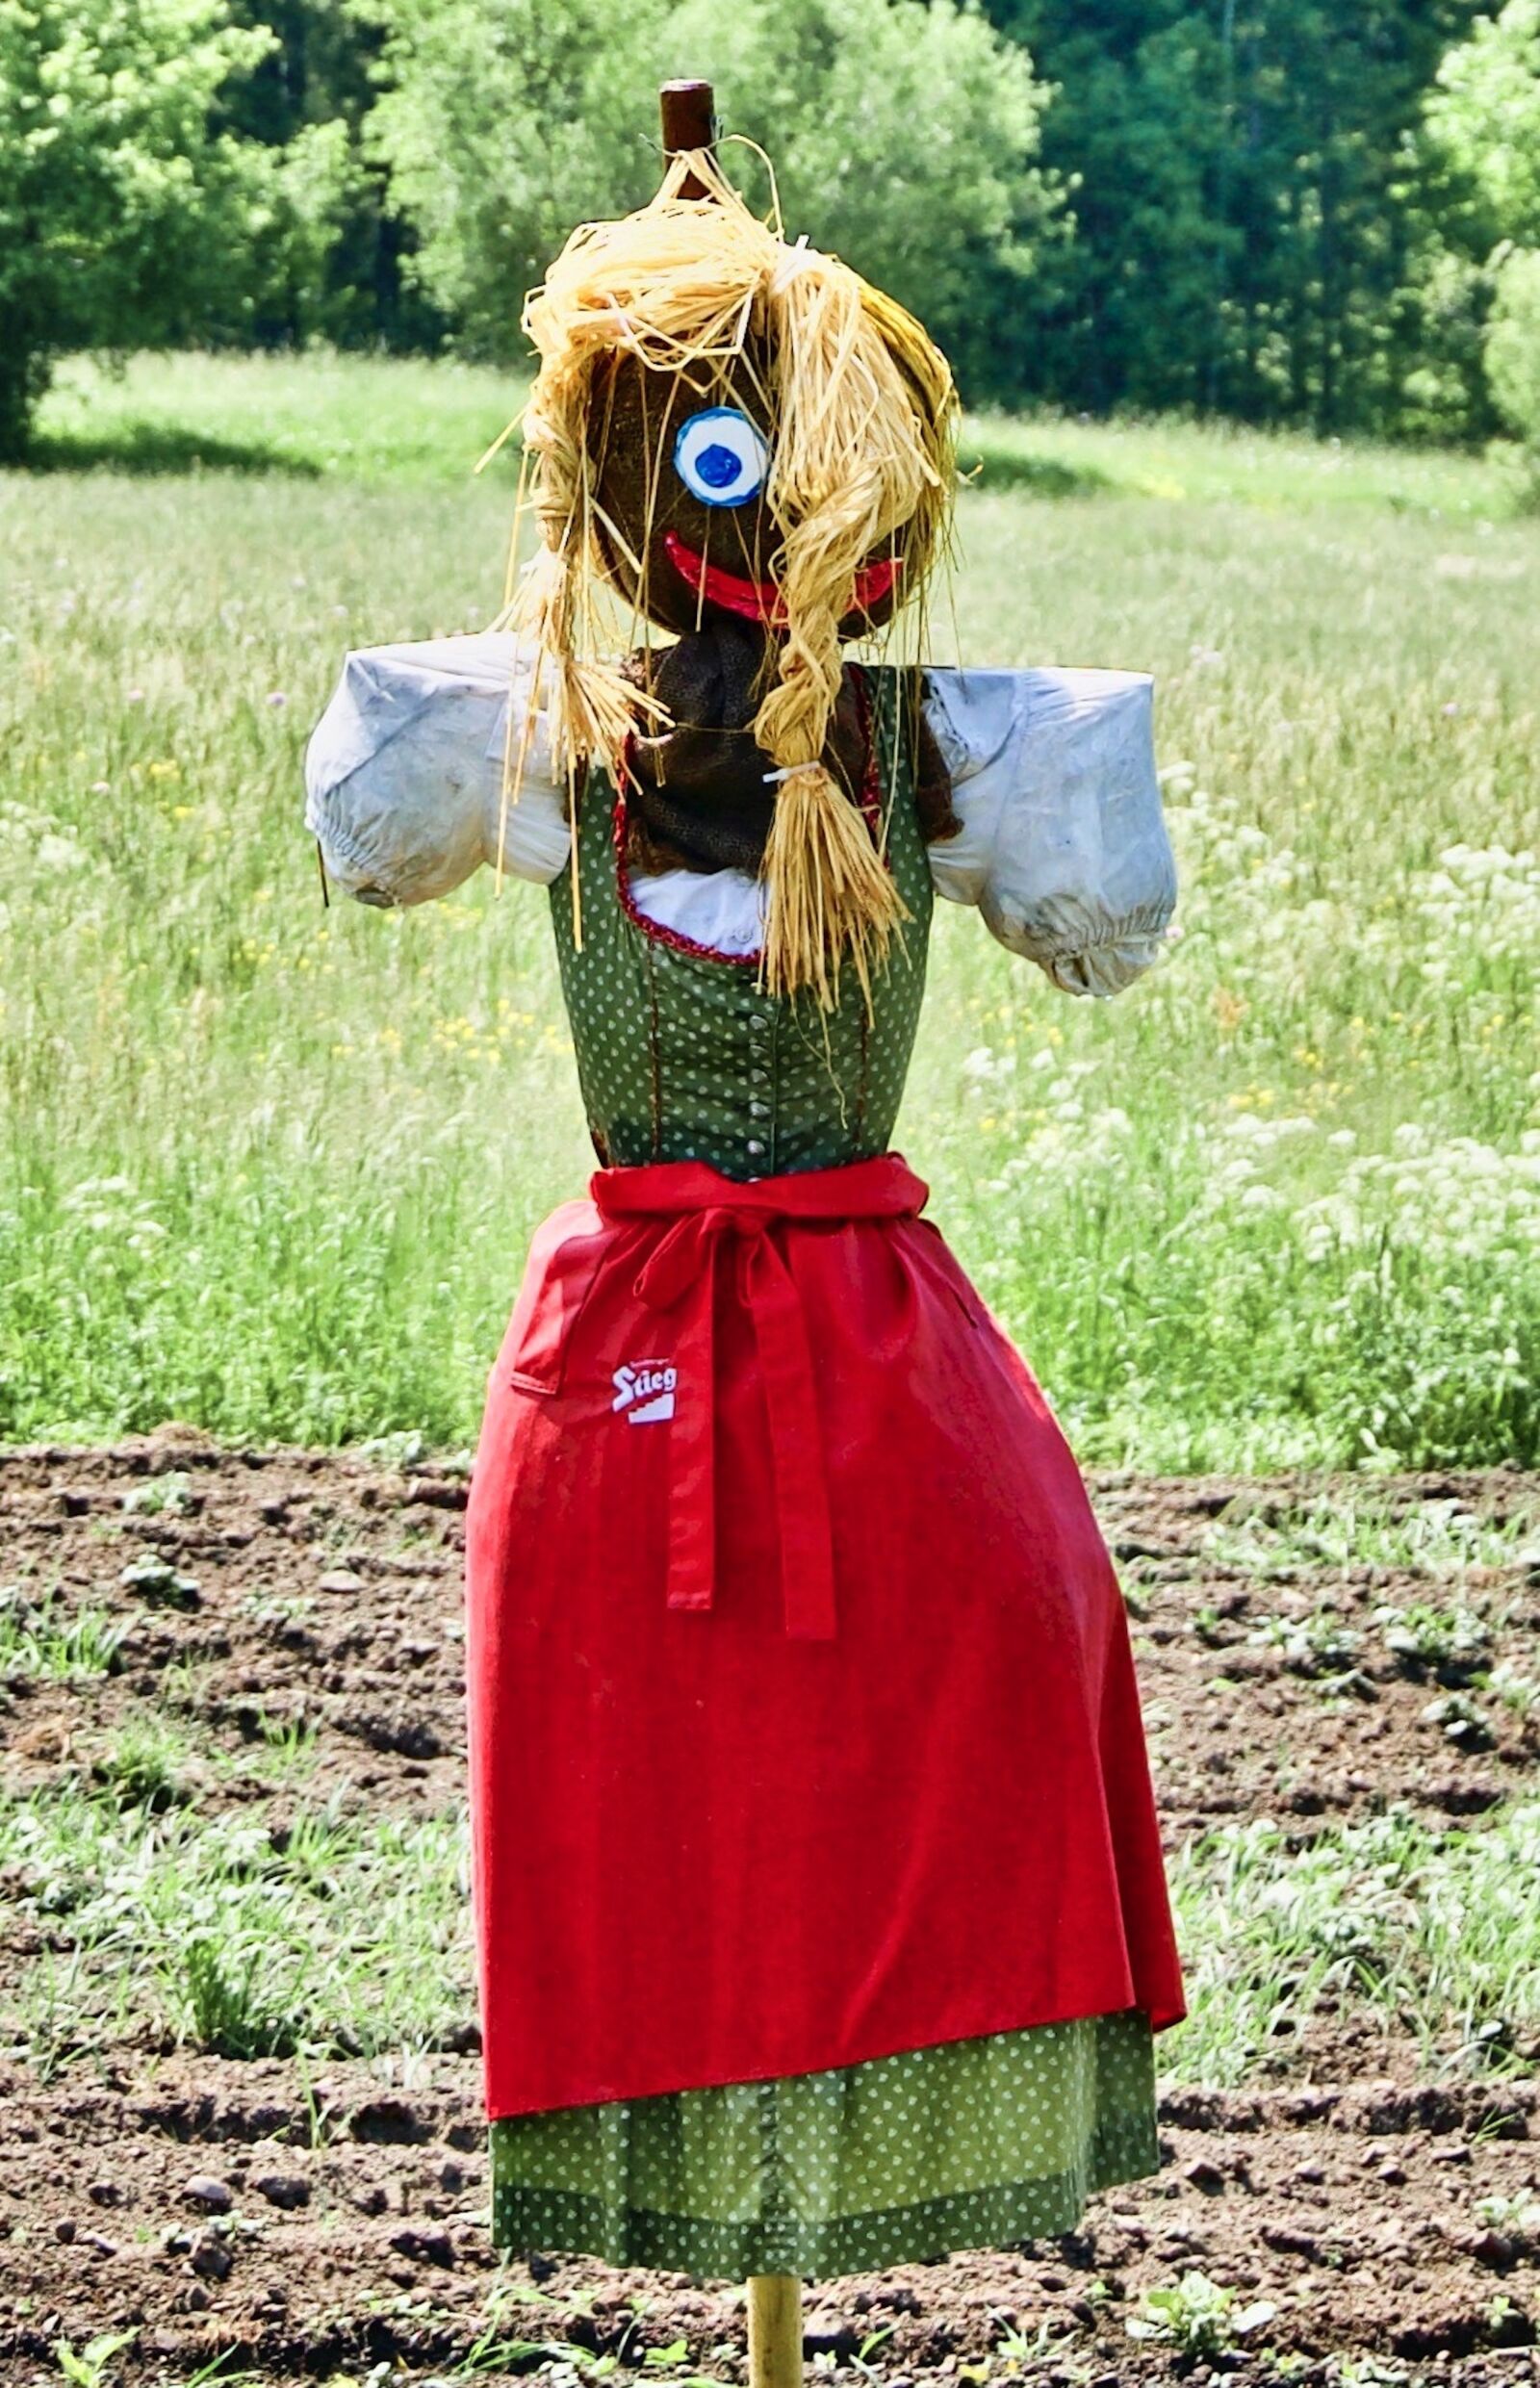 Sony a6500 sample photo. Scarecrow, figure, agriculture photography